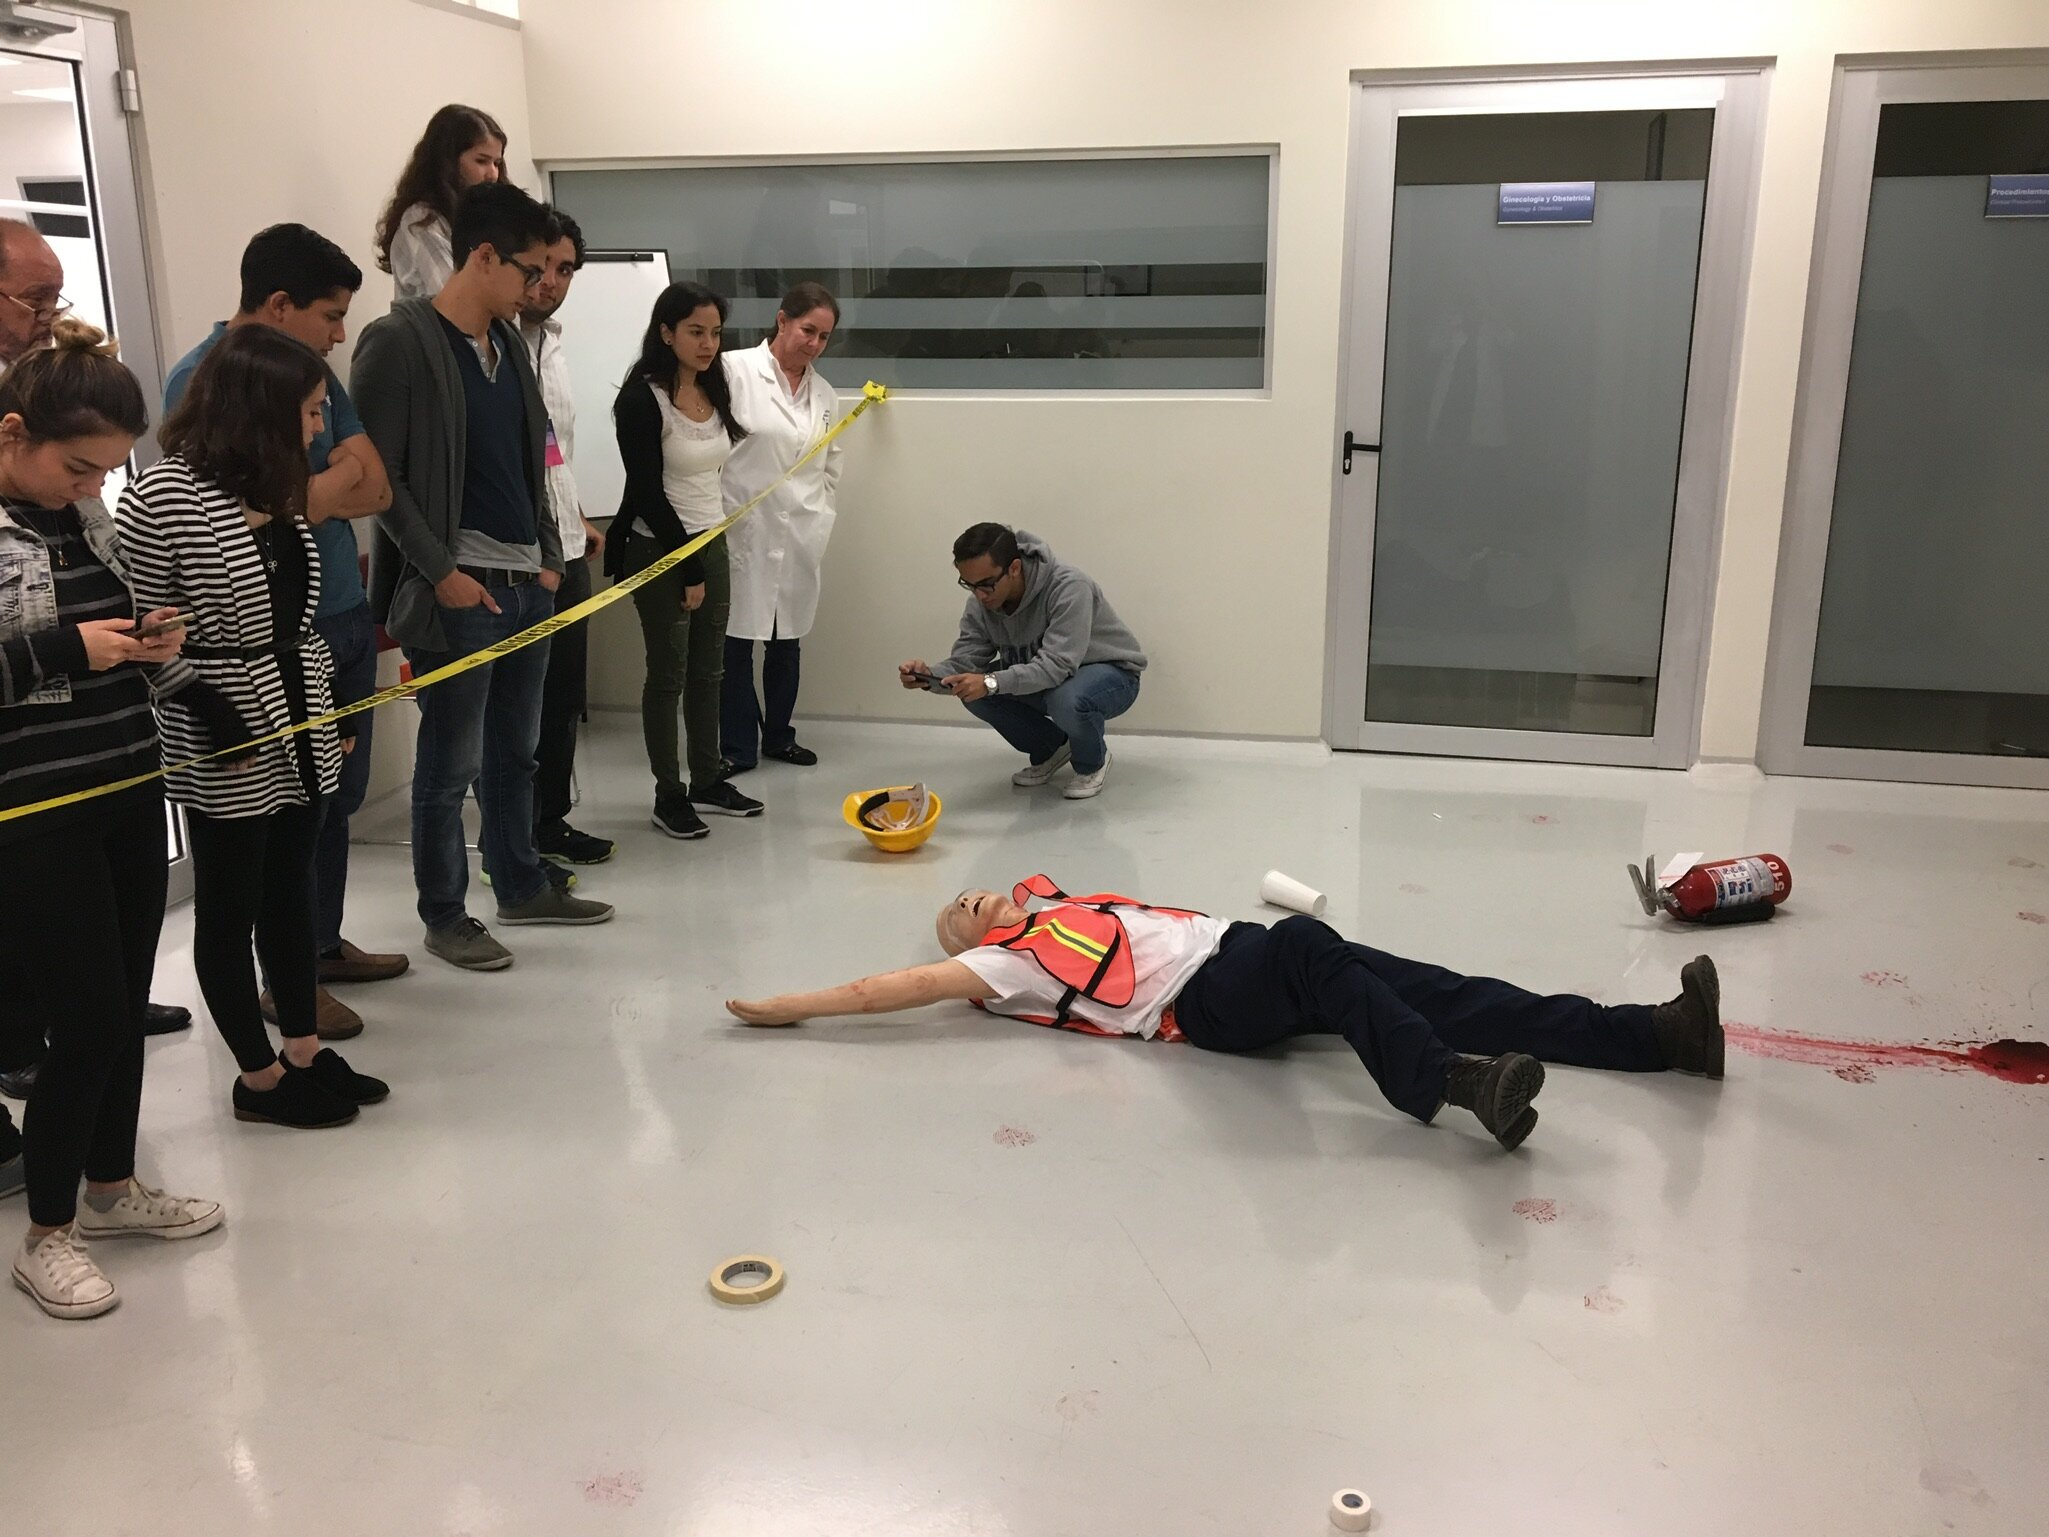 Image 2: Students analyze the crime scene using a mannequin.